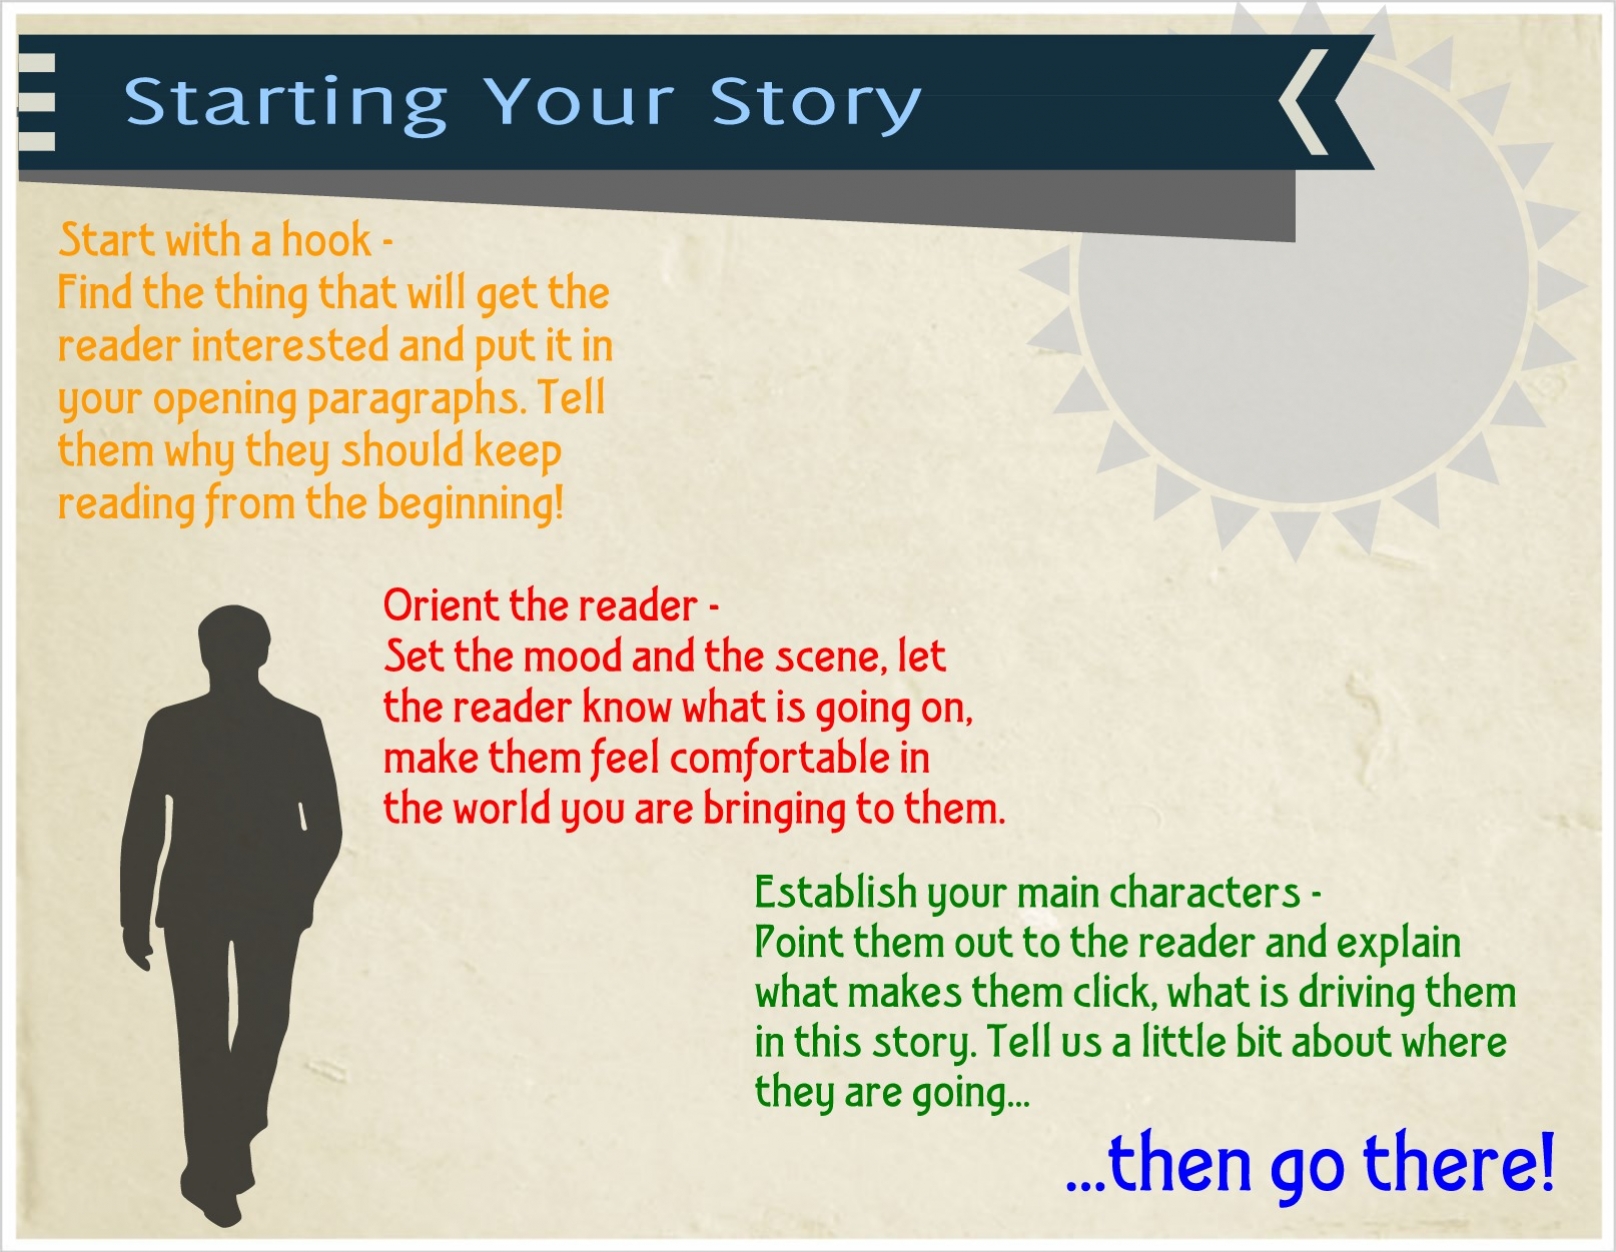 Starting Your Story